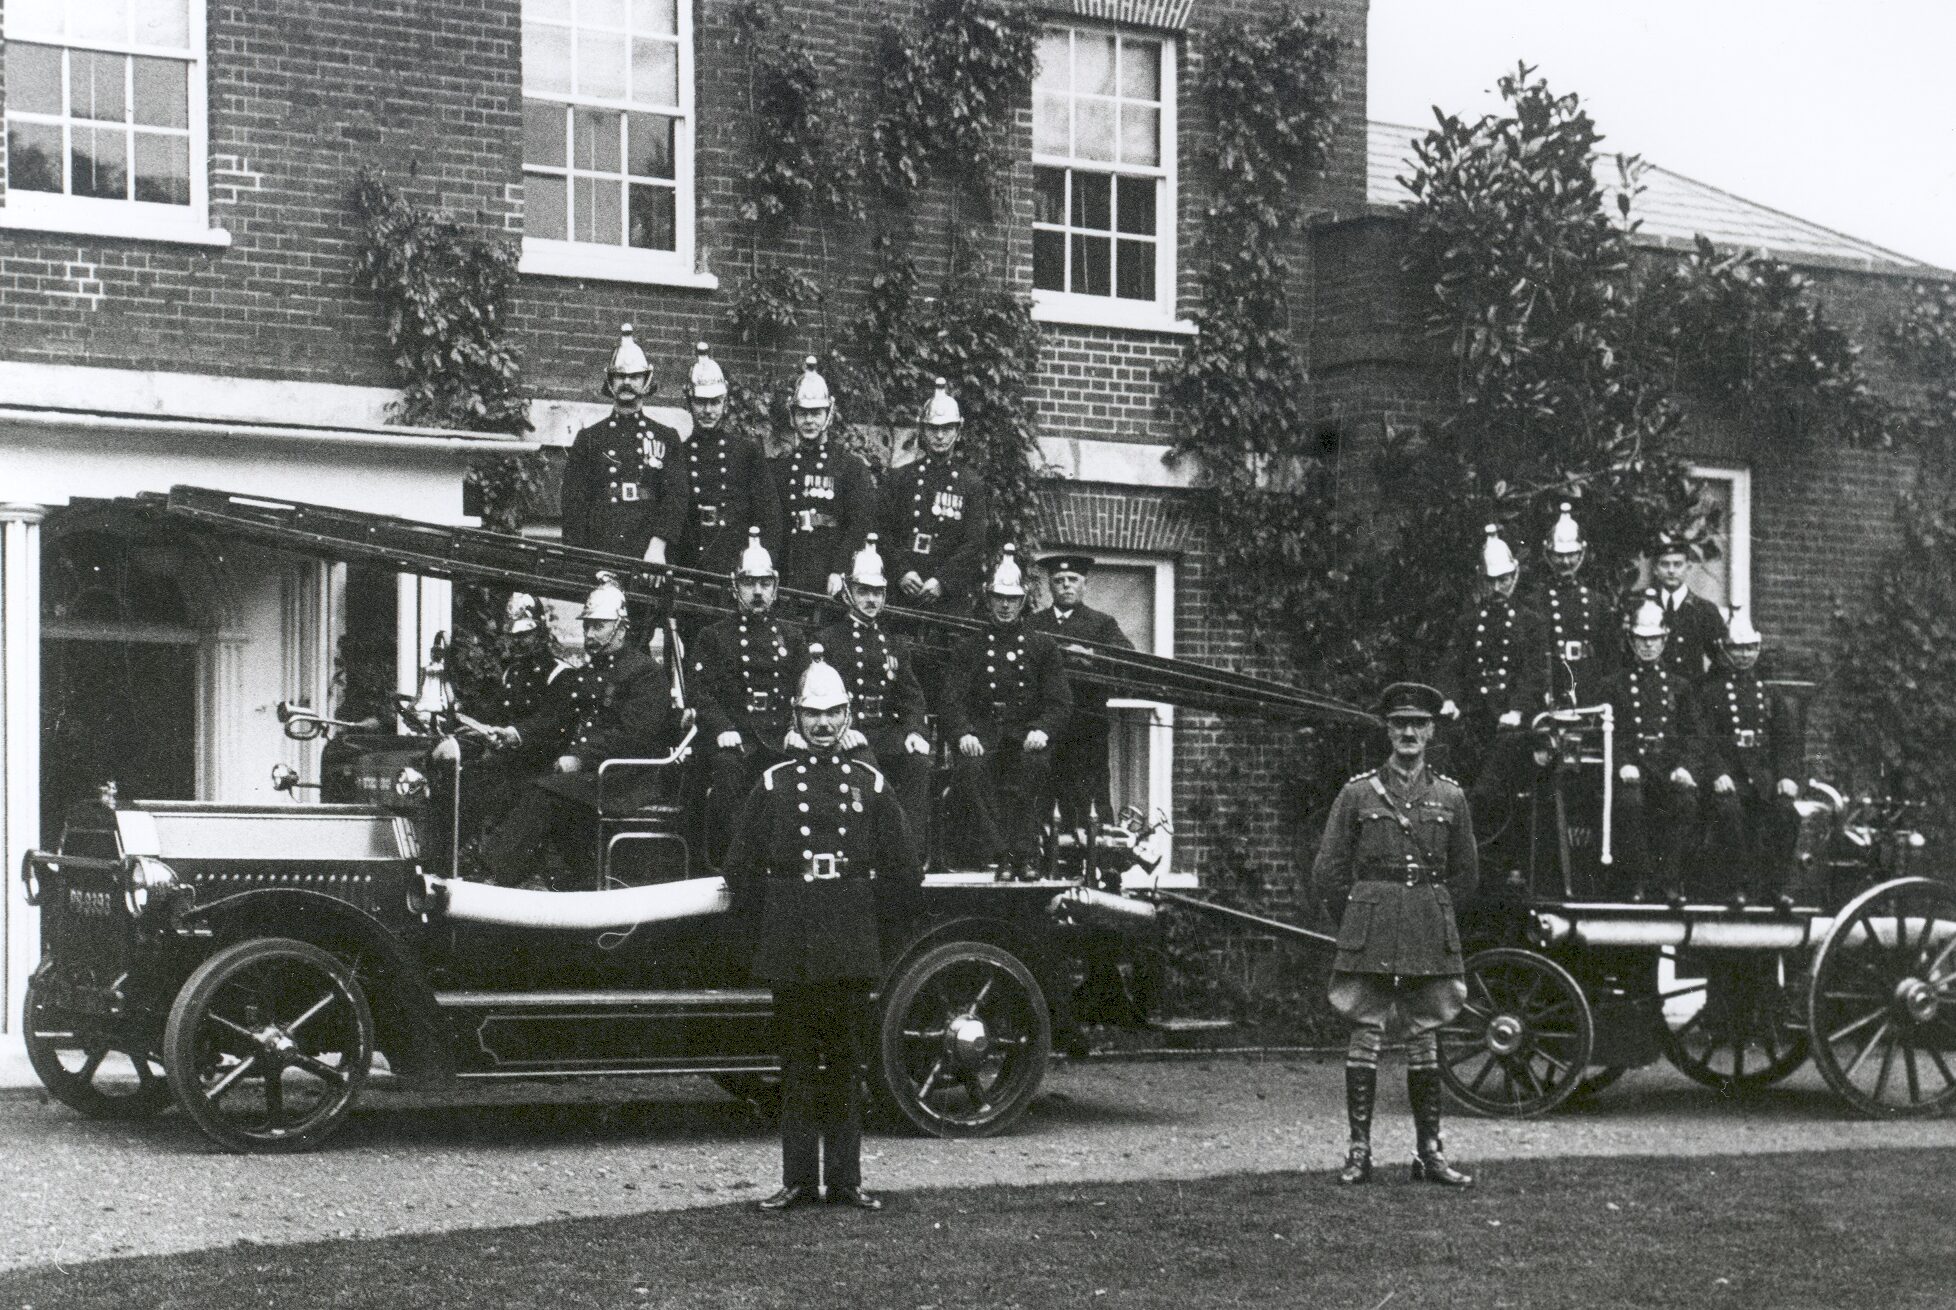 The Walton & Weybridge Fire Brigade in 1921 with their new Dennis motor tender and old Shand Mason steam engine, posed outside Elm Grove under their Chief Officer, Ralph Wilds.